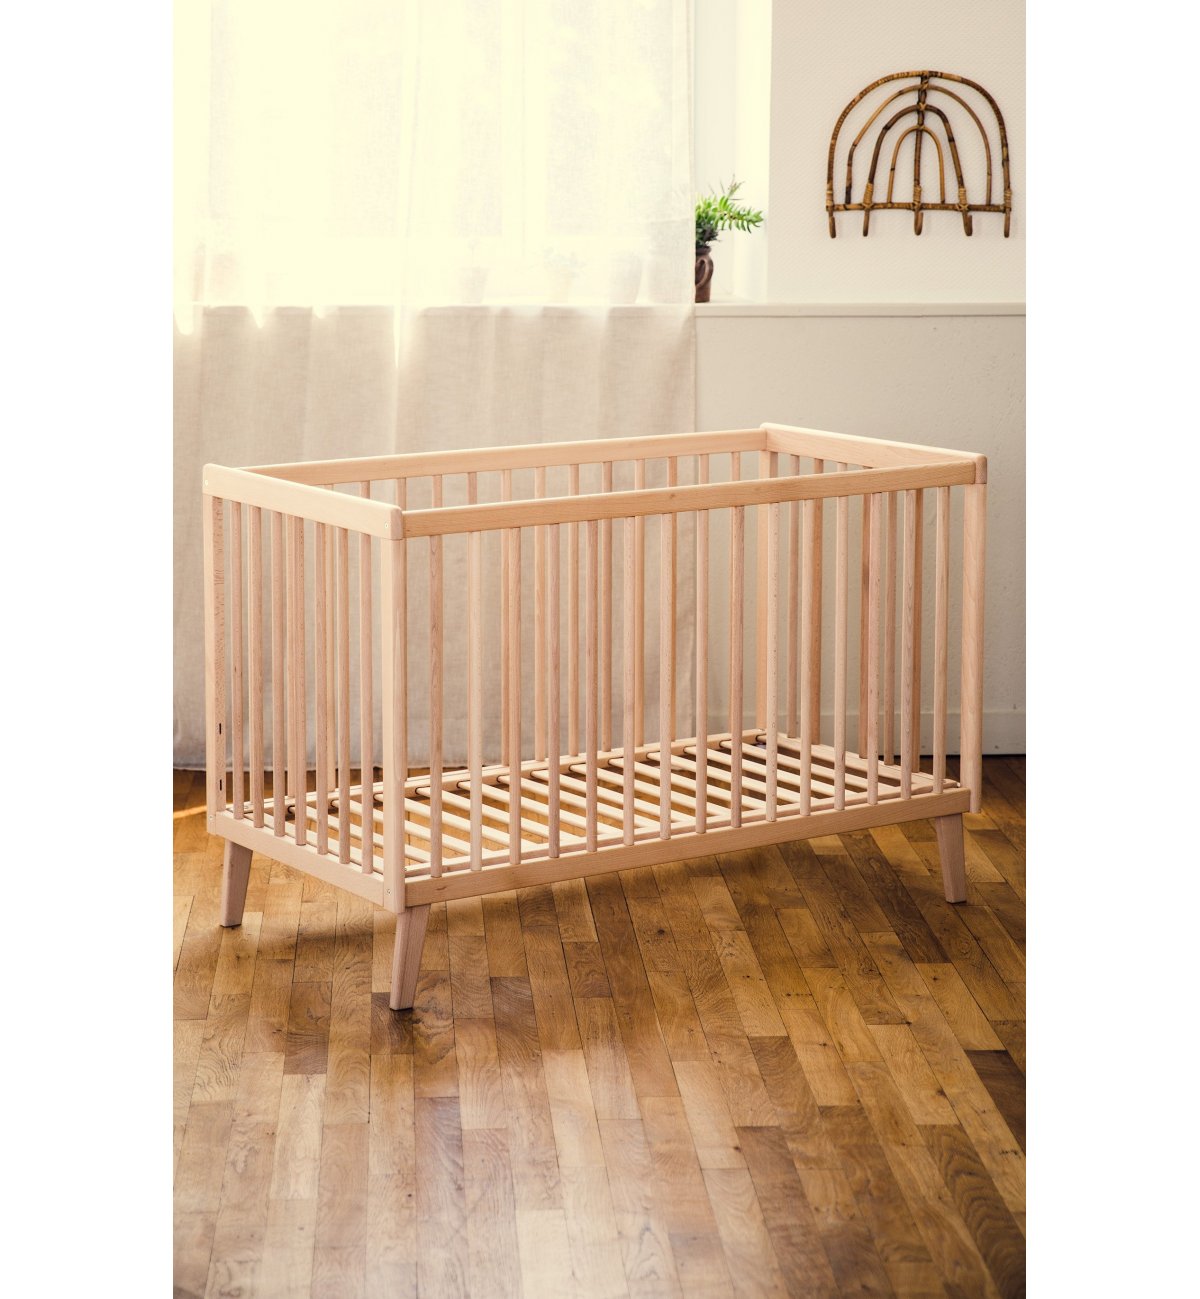 Solid wood crib made in Spain